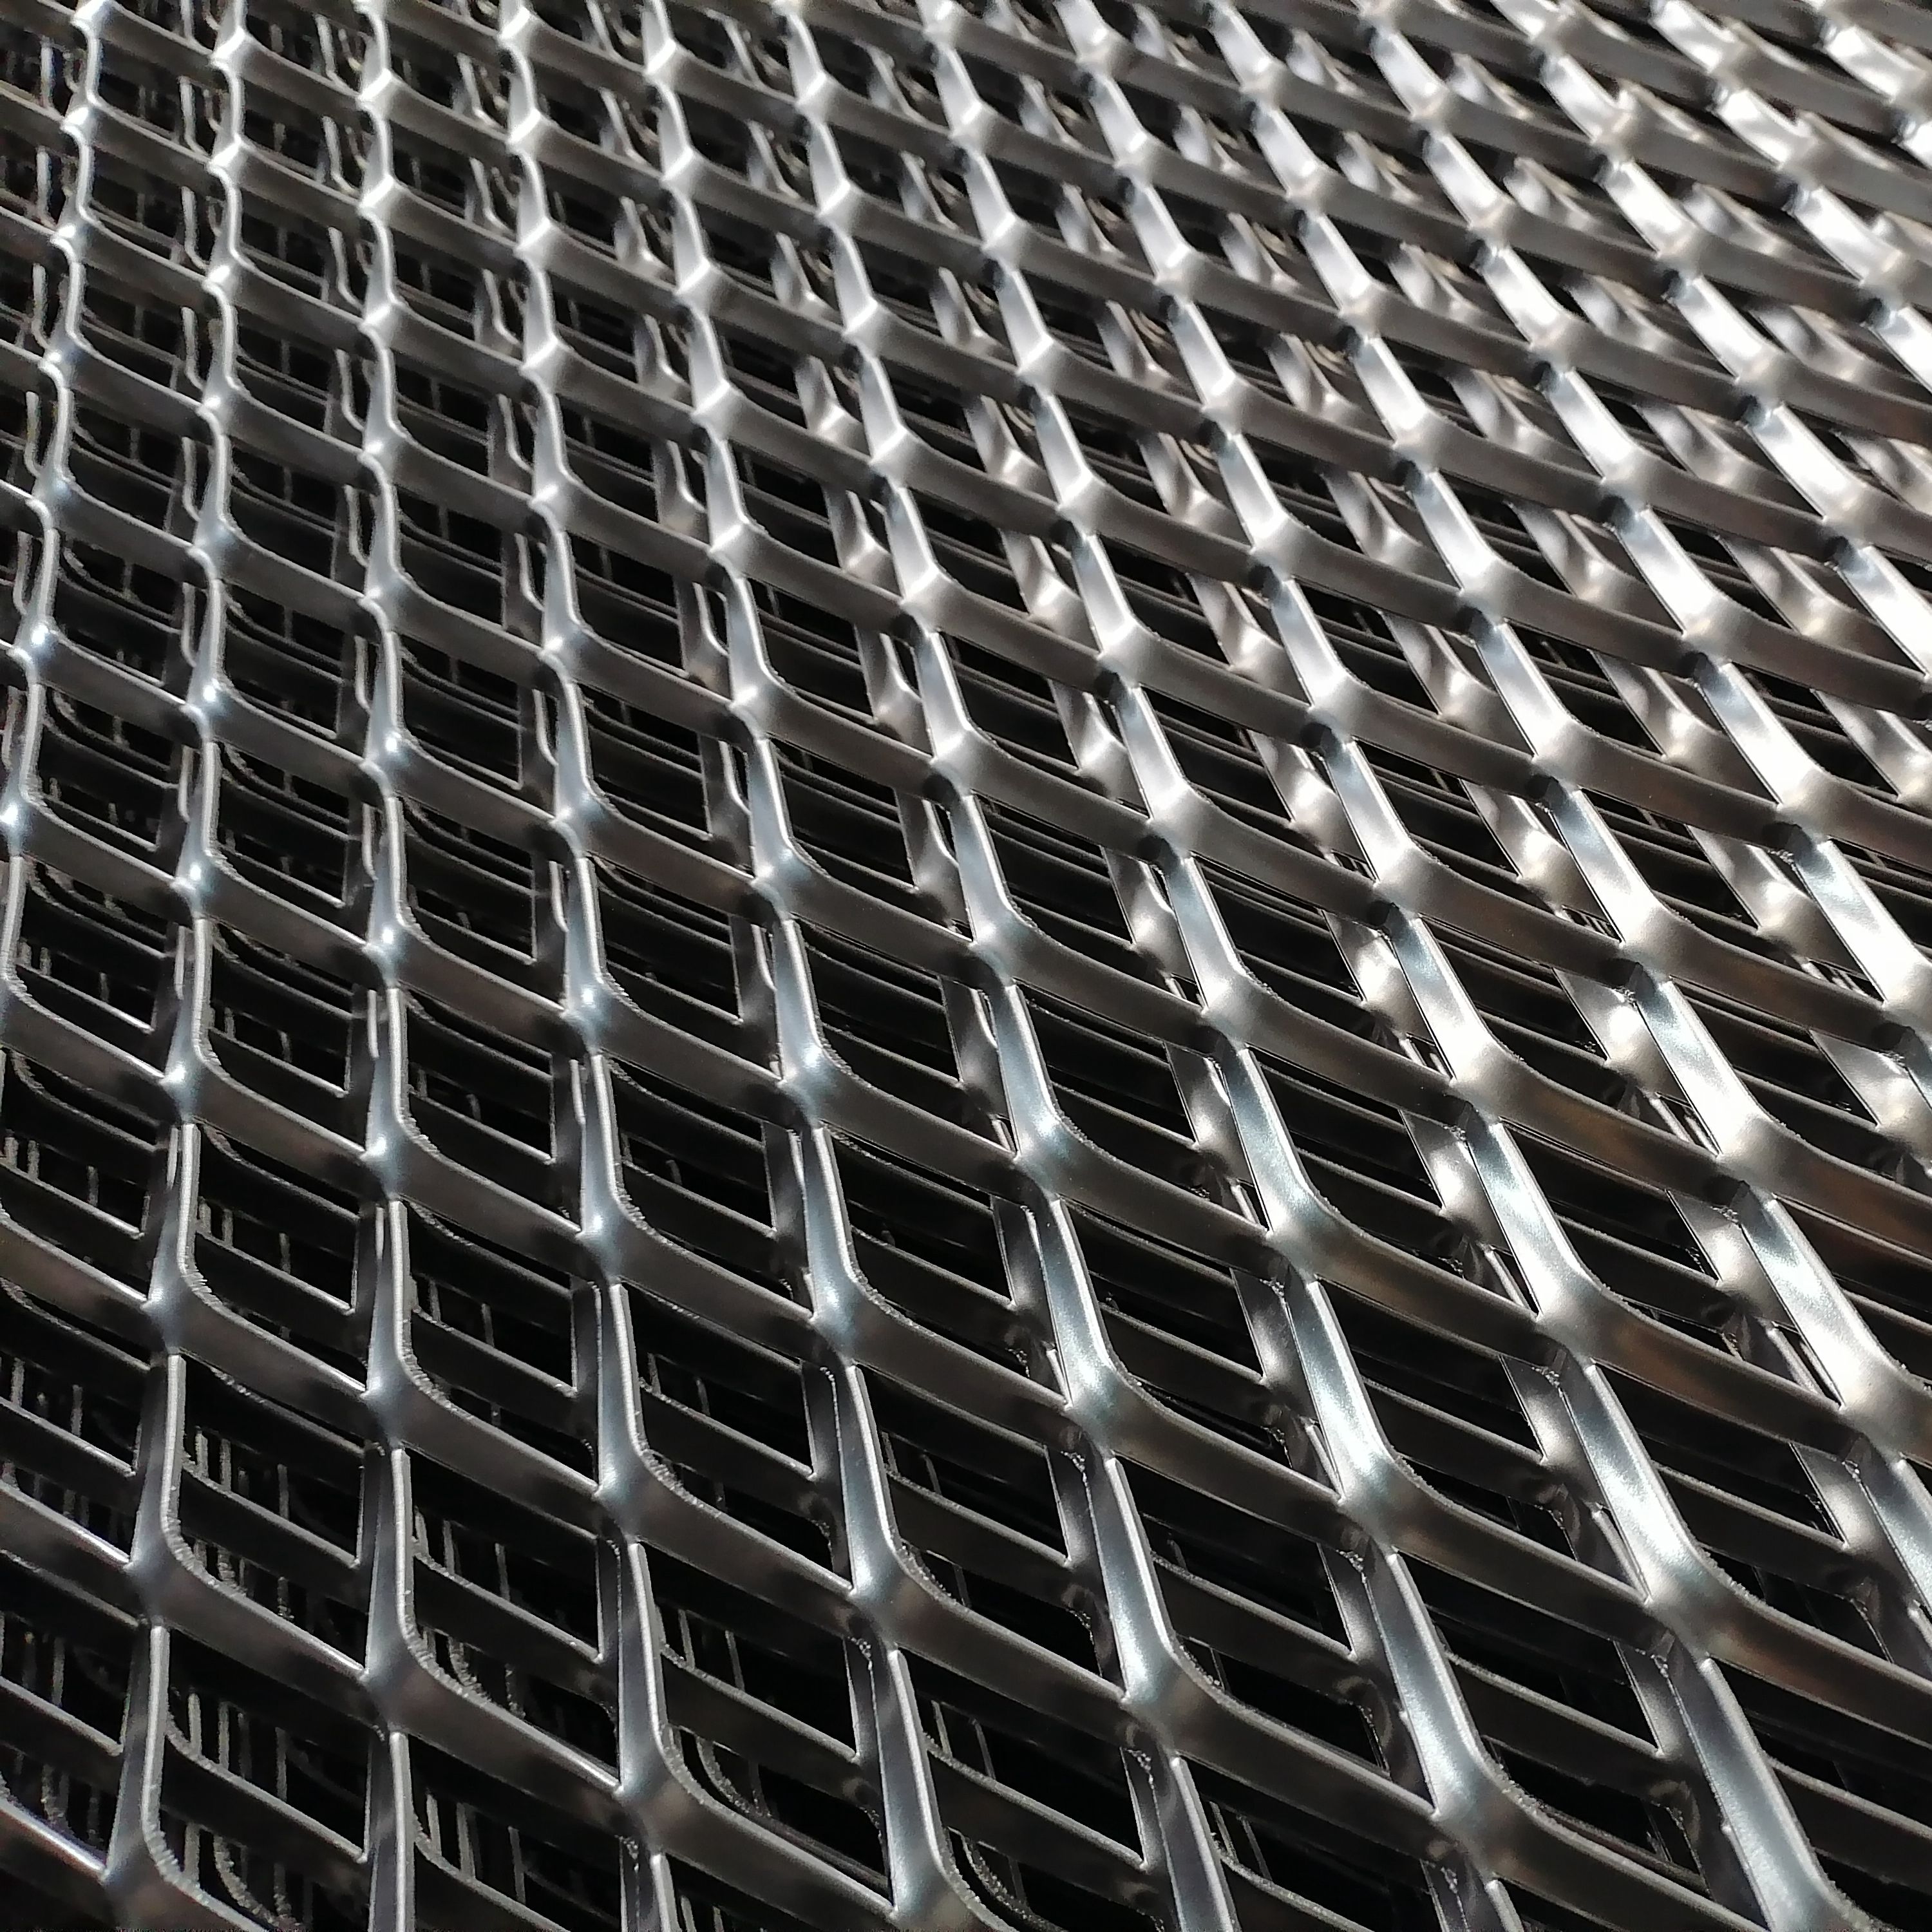 Customized Expanded Metal Mesh,China Expanded Steel,China Expanded Metal Mesh,China Expanded Metal Sheet,China Expanded Metal Facade